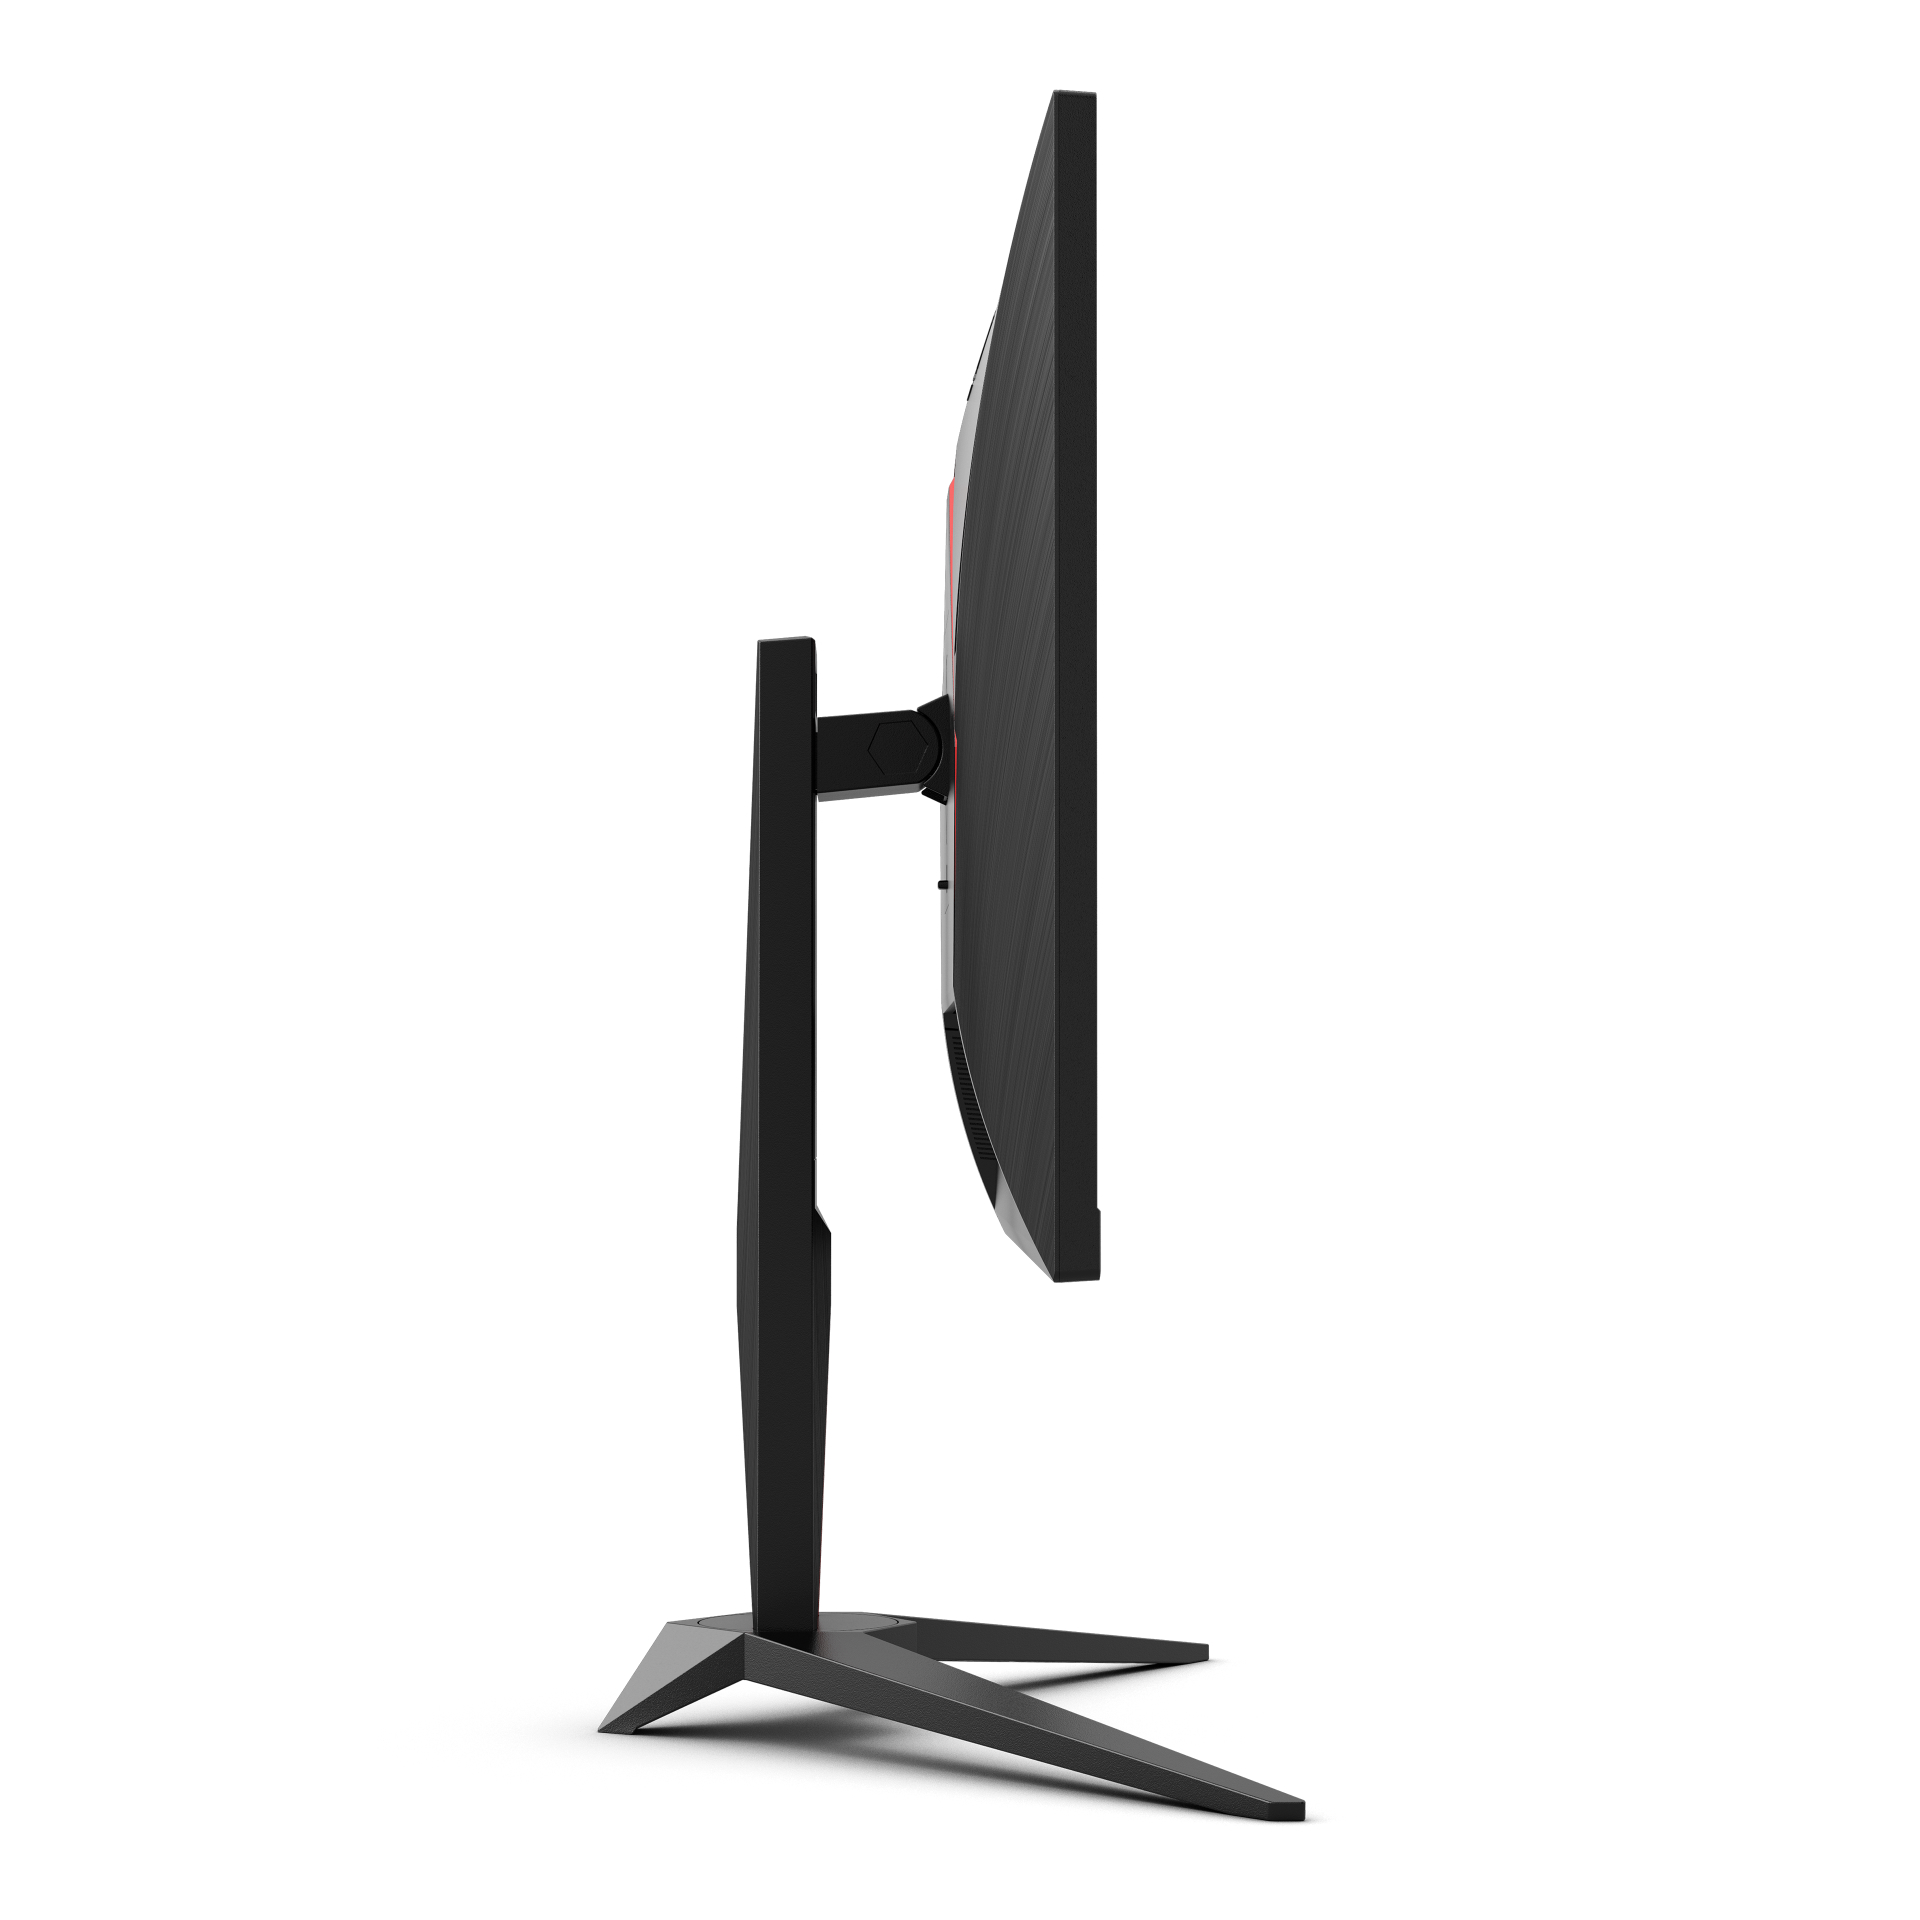 AOC announces new curved gaming monitor with 165Hz refresh rate